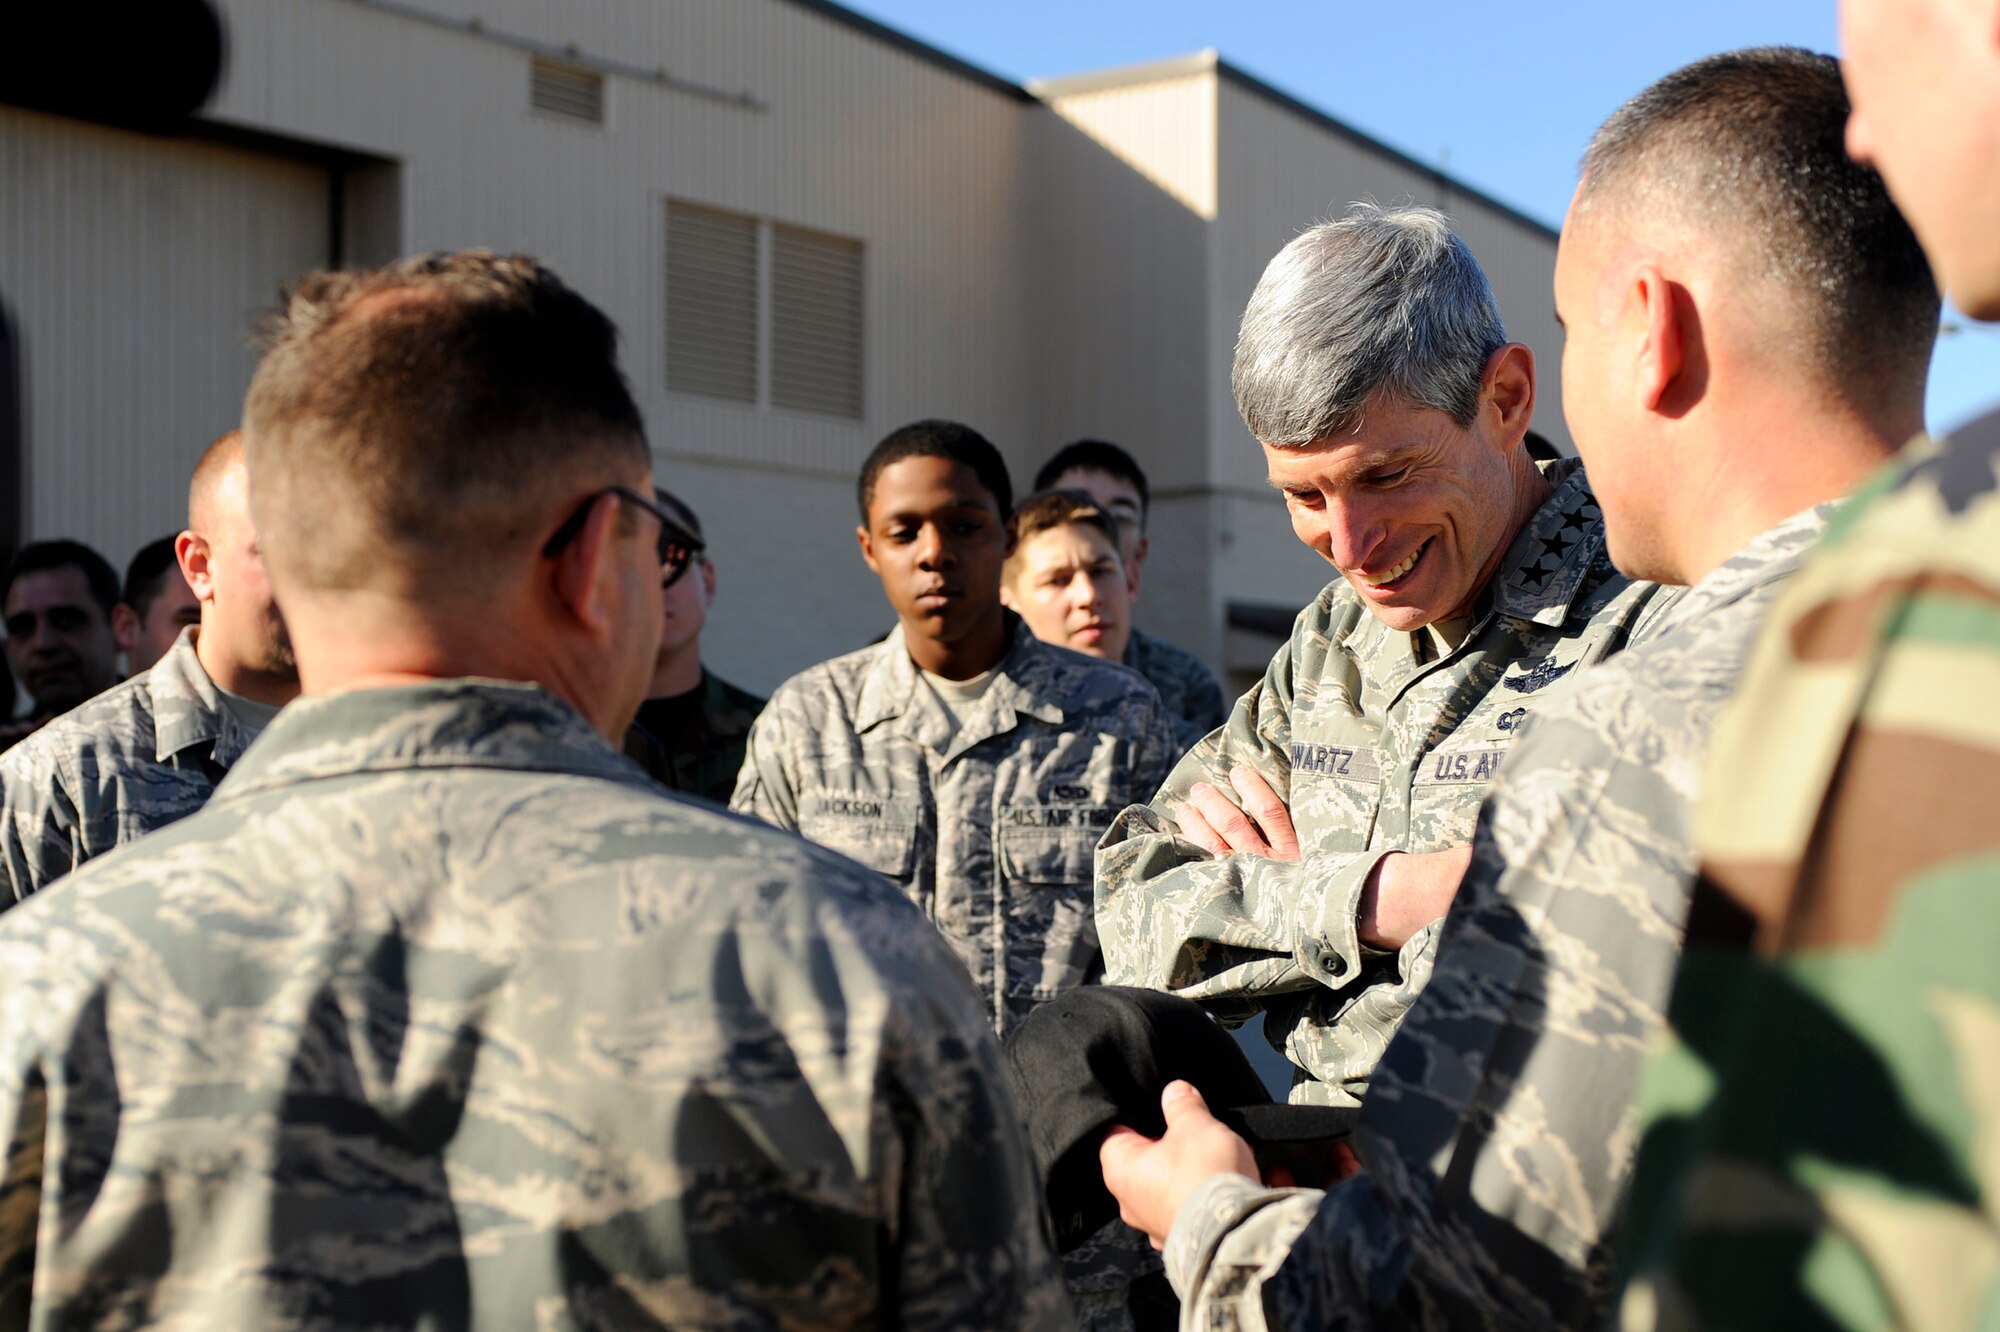 HURLBURT FIELD, Fla. -- Gen. Norton A. Schwartz, Chief of Staff of the U.S. Air Force, Washington, D.C., receives a hat from Capt. Robert Carreiro, 1st Special Operation Aircraft Maintenance Squadron, as a memento of his visit here, Jan. 9. The General Schwartz met with Airmen assigned to the 15th Aircraft Maintenance Unit and toured a PC-12 Pilatus.